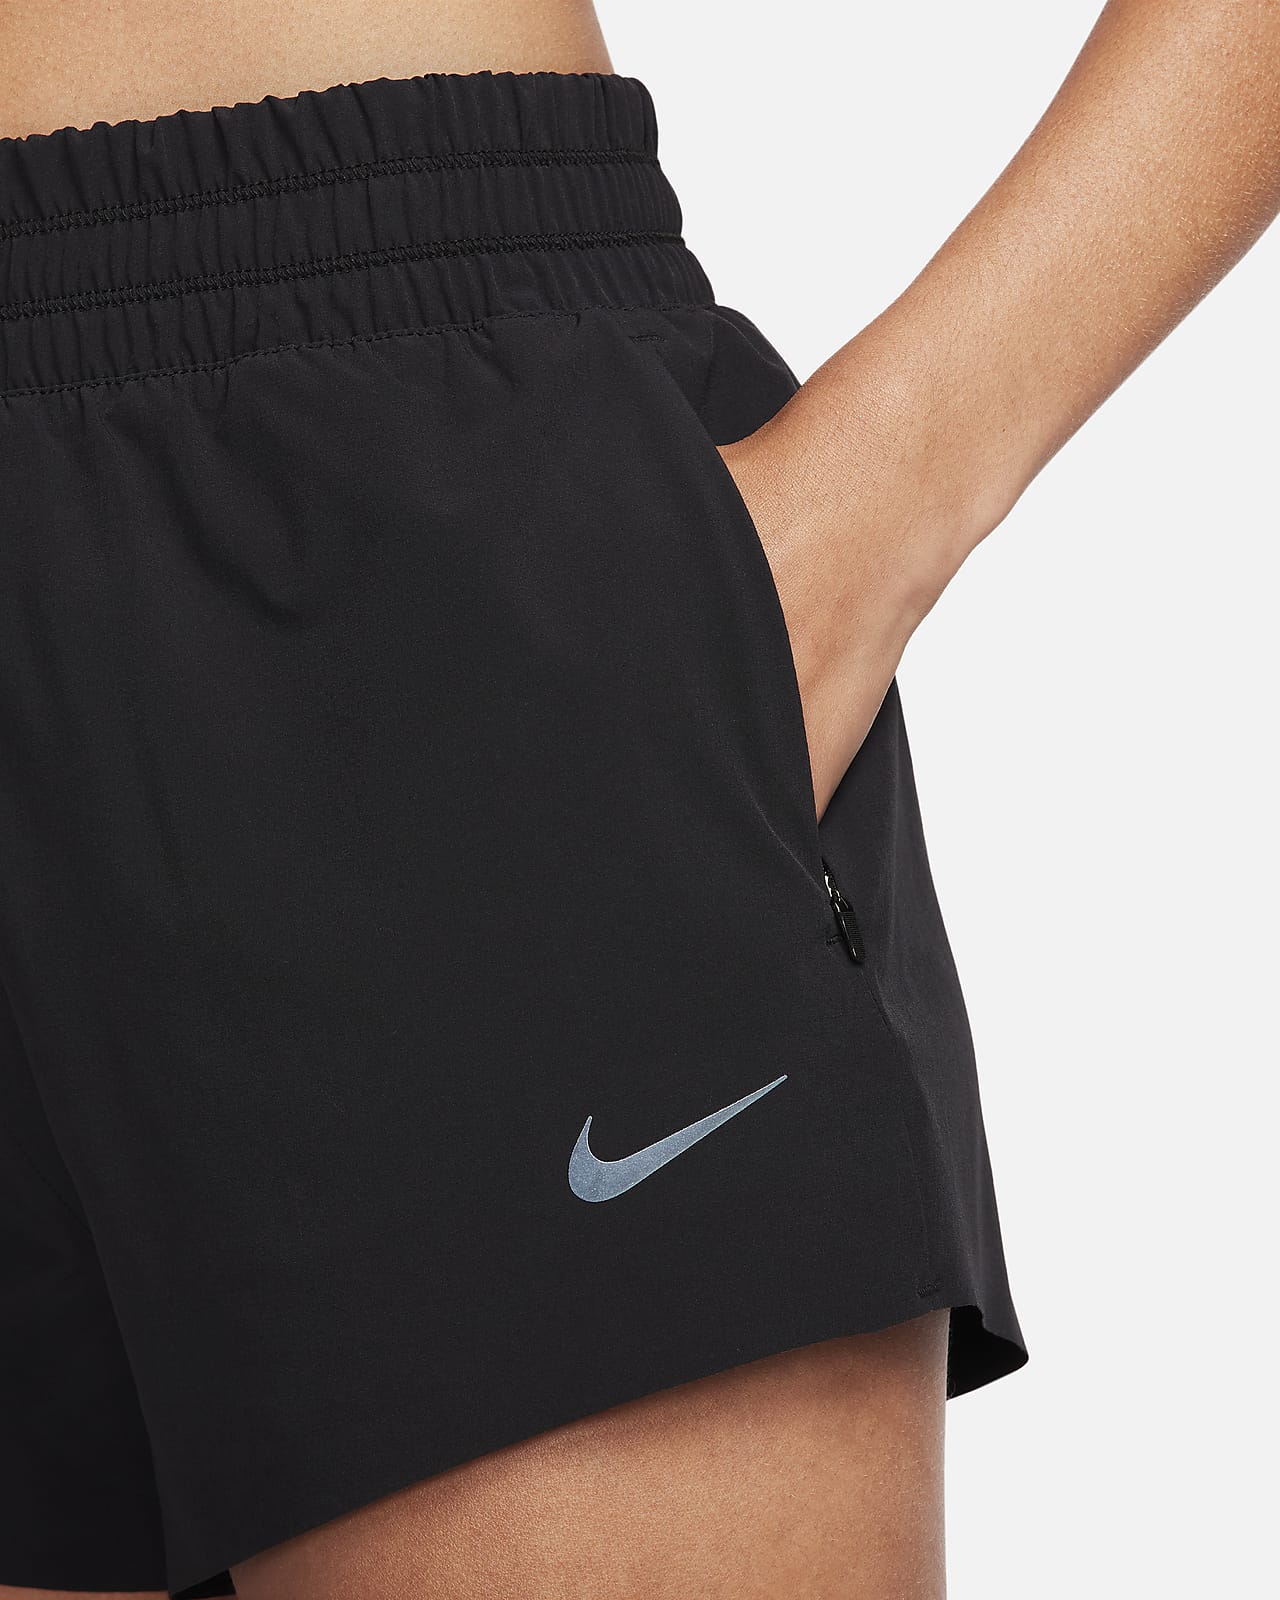 NWT Nike Dri-FIT Essential Women's Running Pants - XL - Style: DH6975-010